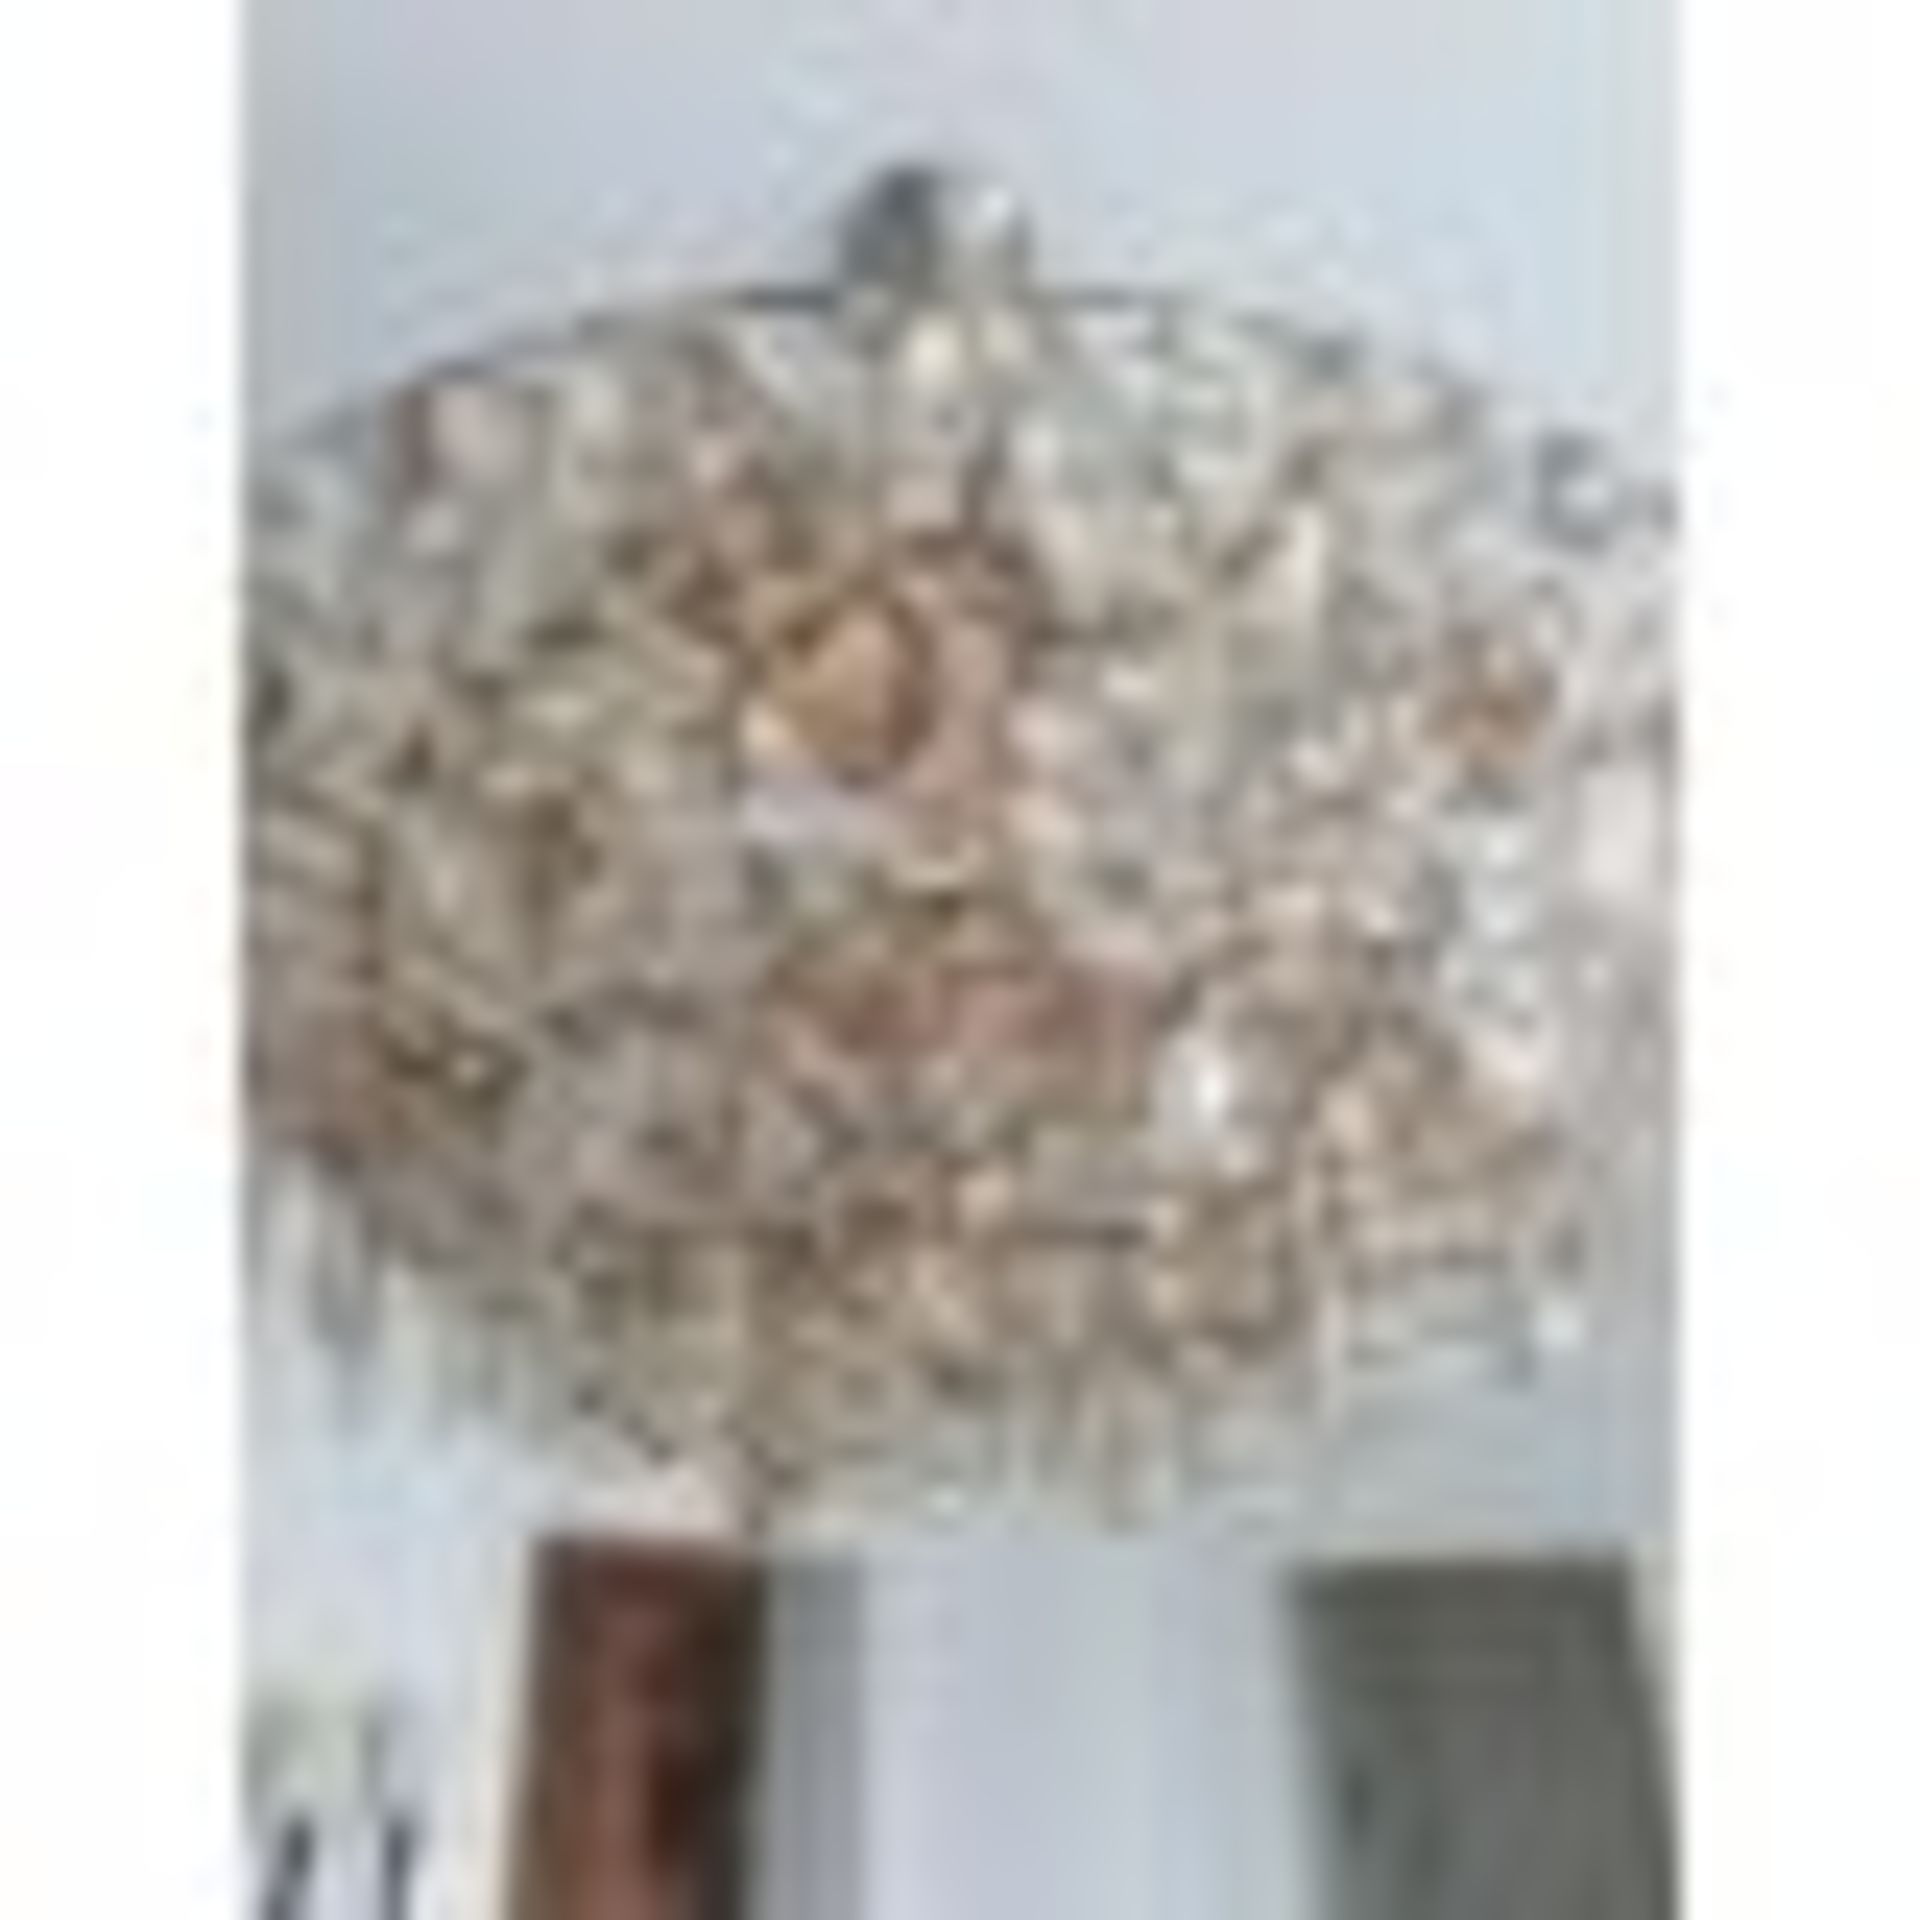 Lolli E Memmoli Ugolino Chandelier Crystals Woven Together Like Fabric, Hung From A Two- - Image 2 of 3